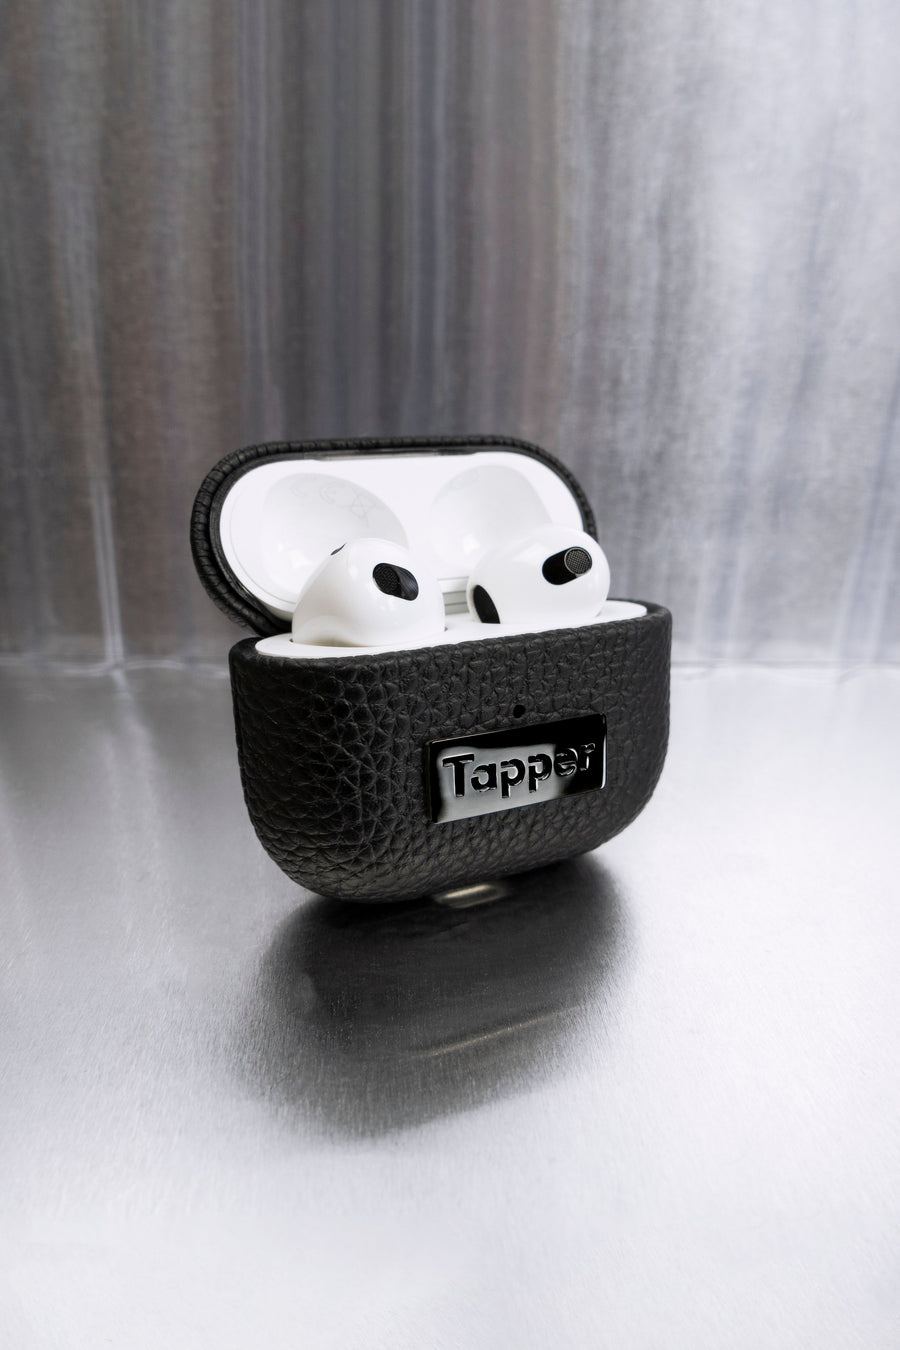 Tapper's luxurious black genuine cow leather AirPods case protects and elevates the look of your AirPods. The luxurious, protective case for AirPods with a metal logo plate in hematite black plating steps up your AirPods game. The next must-have high end protective Apple AirPods accessory in real leather and precious metals. Compatible with AirPods (3rd generation). Designed in Sweden by Tapper. Free Express Shipping at gettapper.com